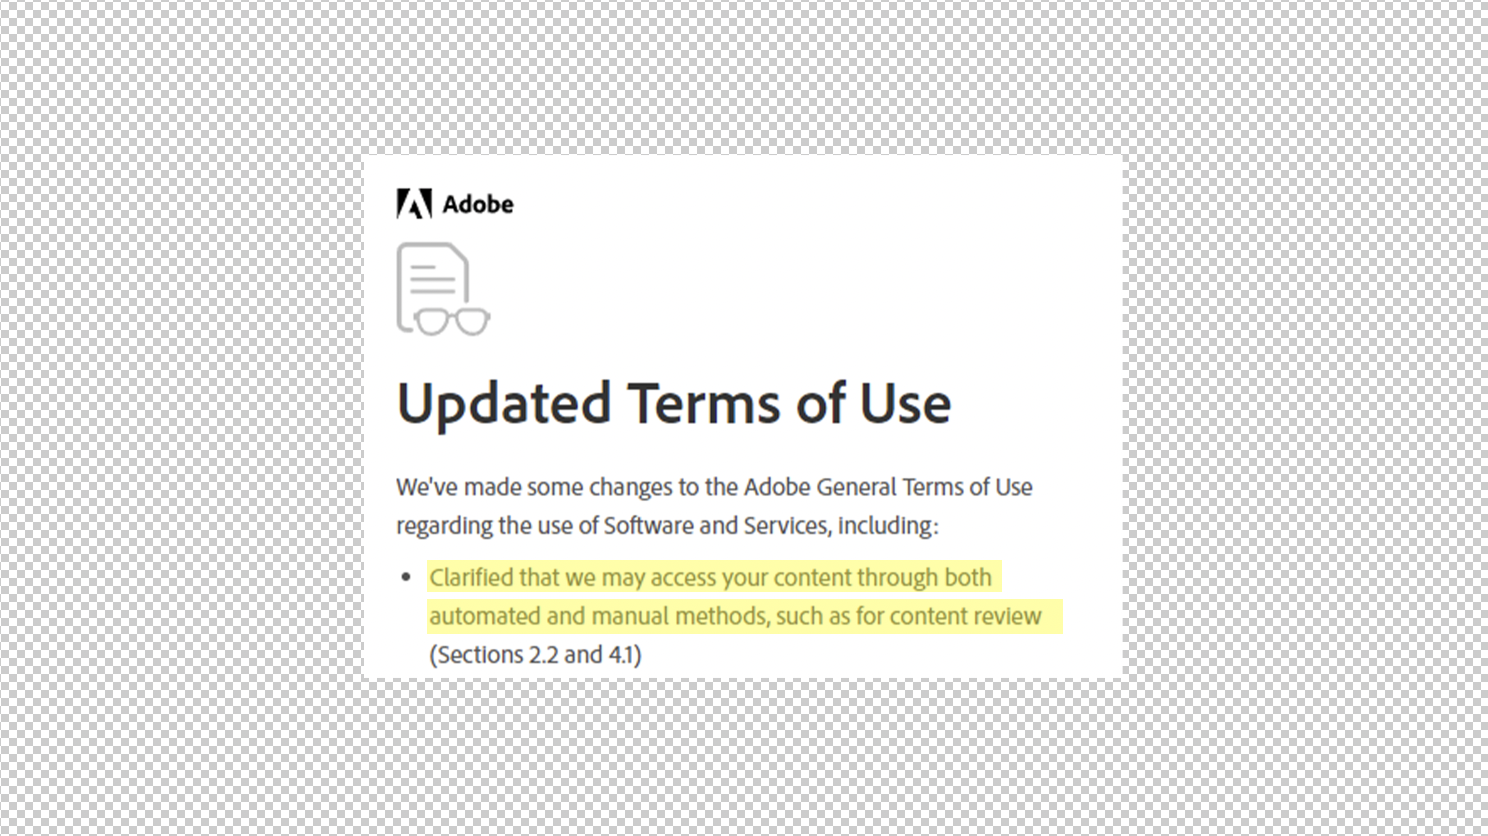 Adobe Outrages Users With Updated General Terms of Use and Potentially Unrestricted Access to Their Work